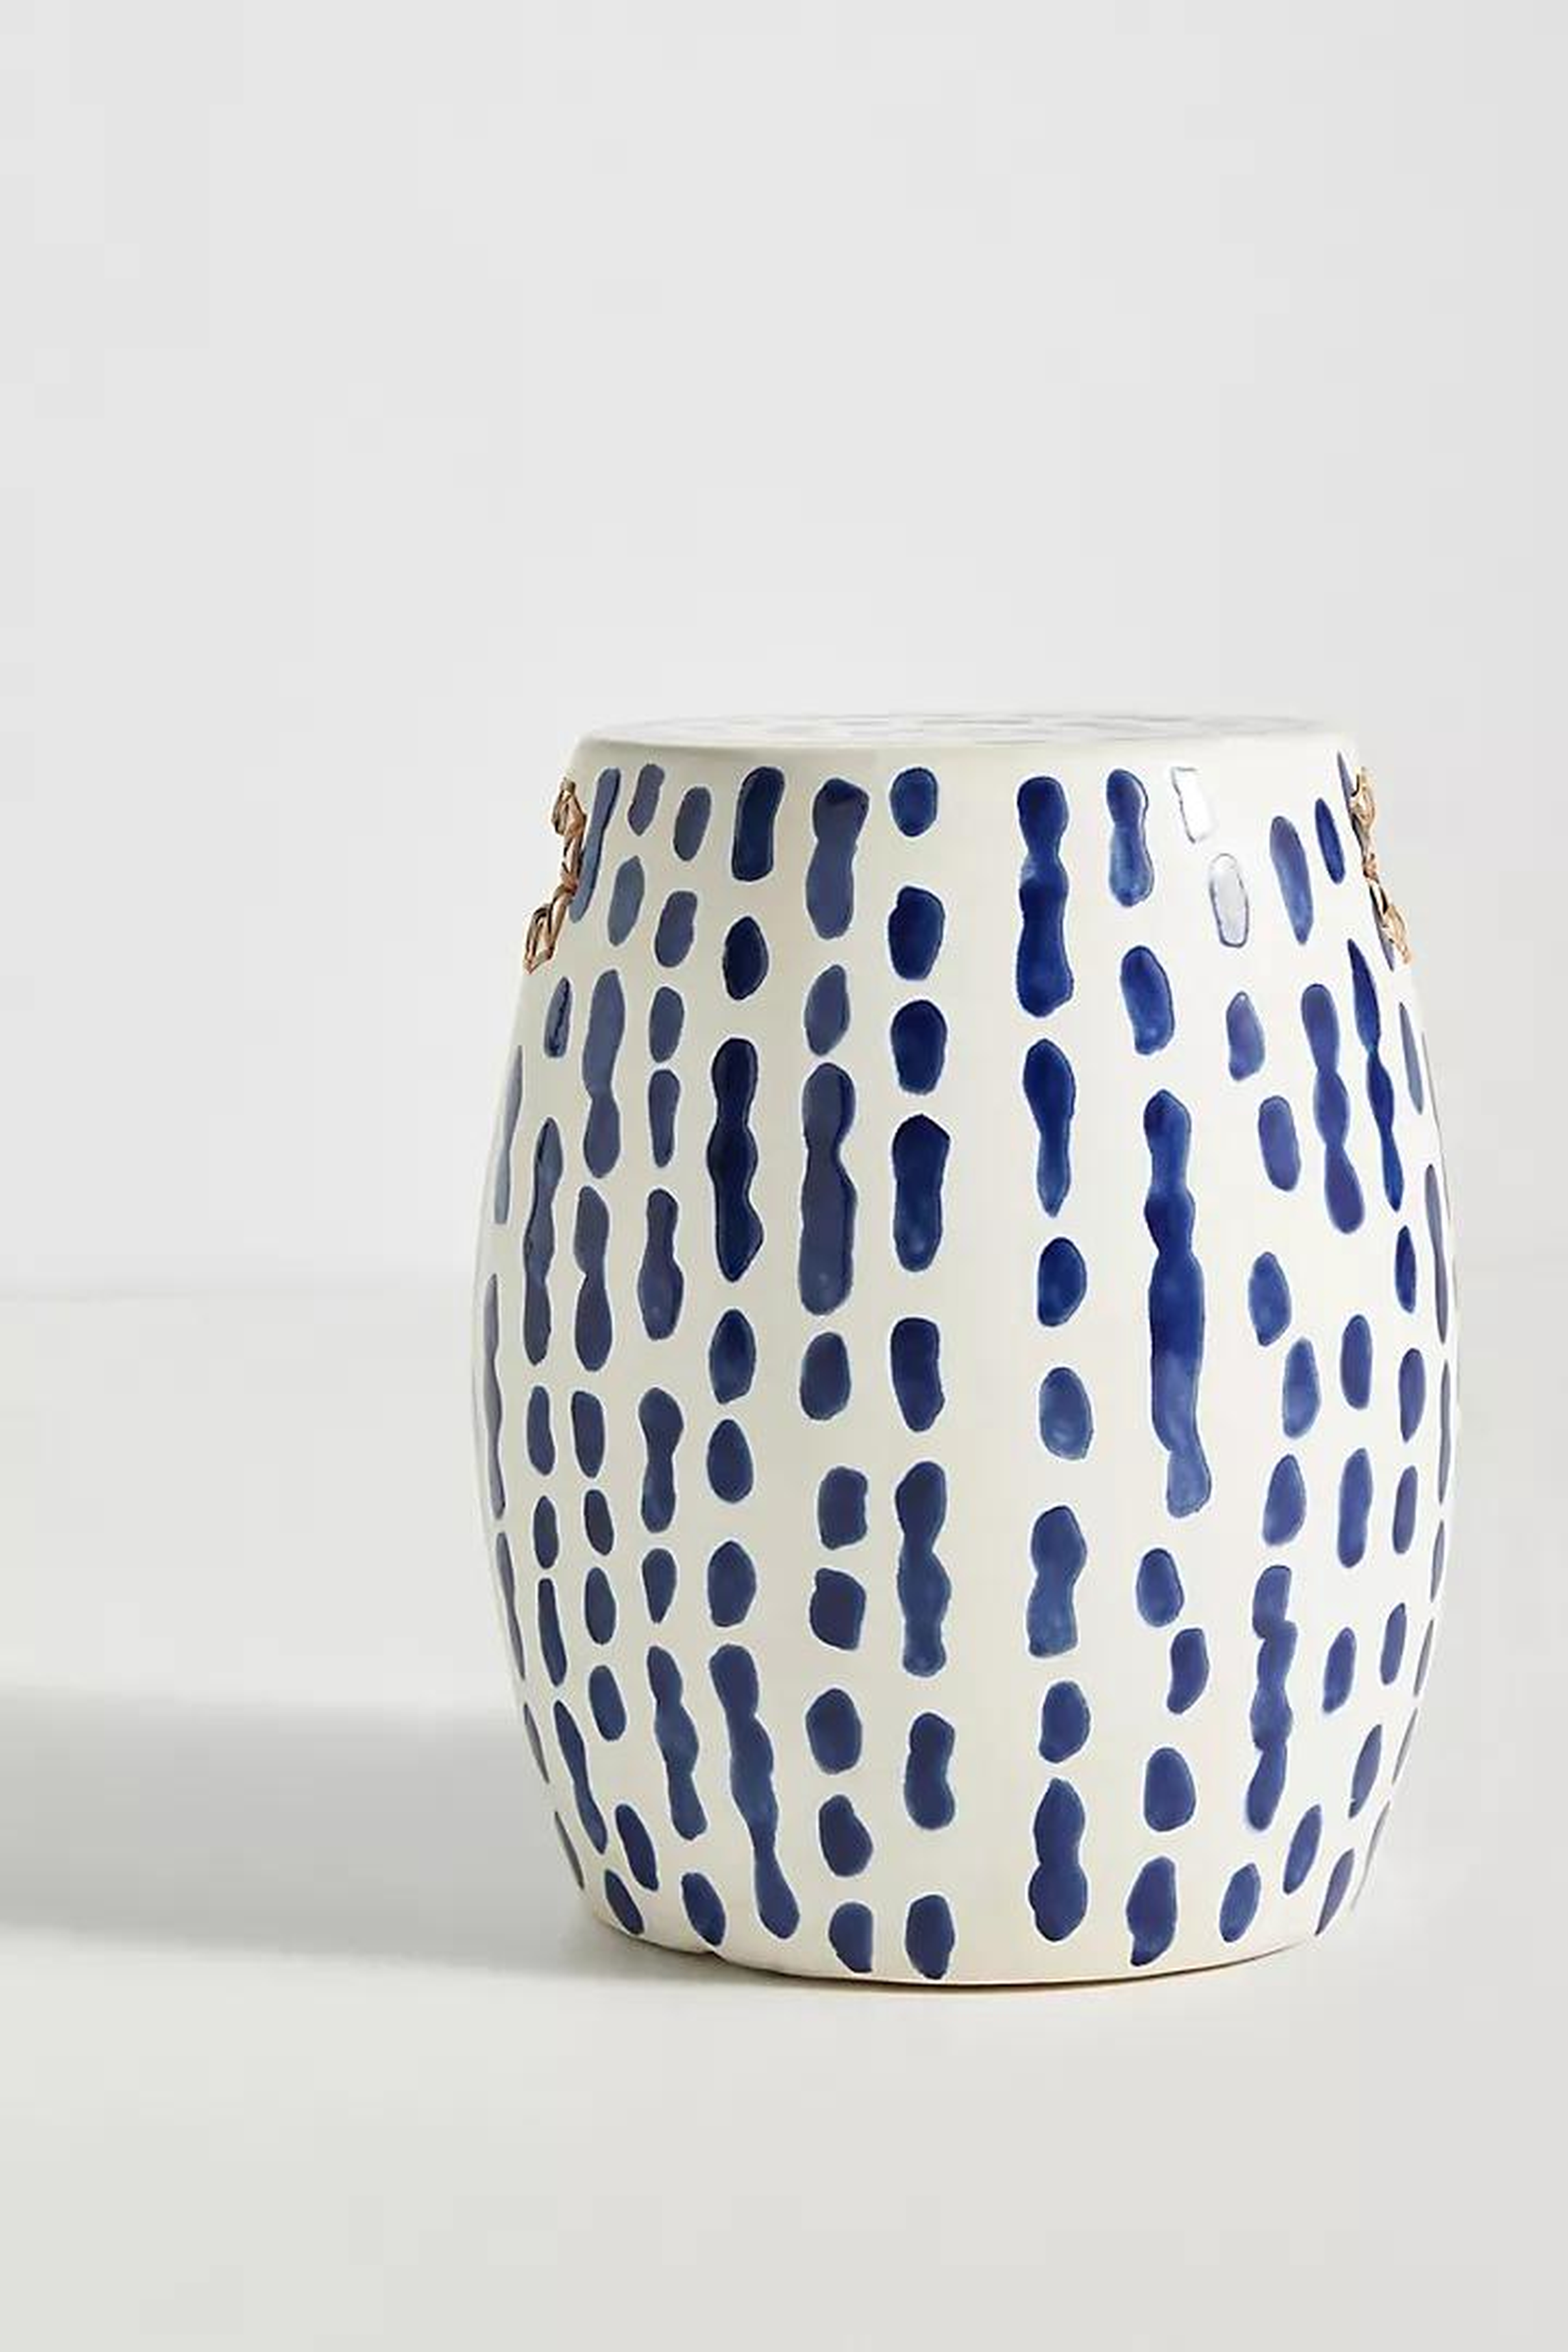 Striped Ceramic Side Table By Anthropologie in Blue - Anthropologie